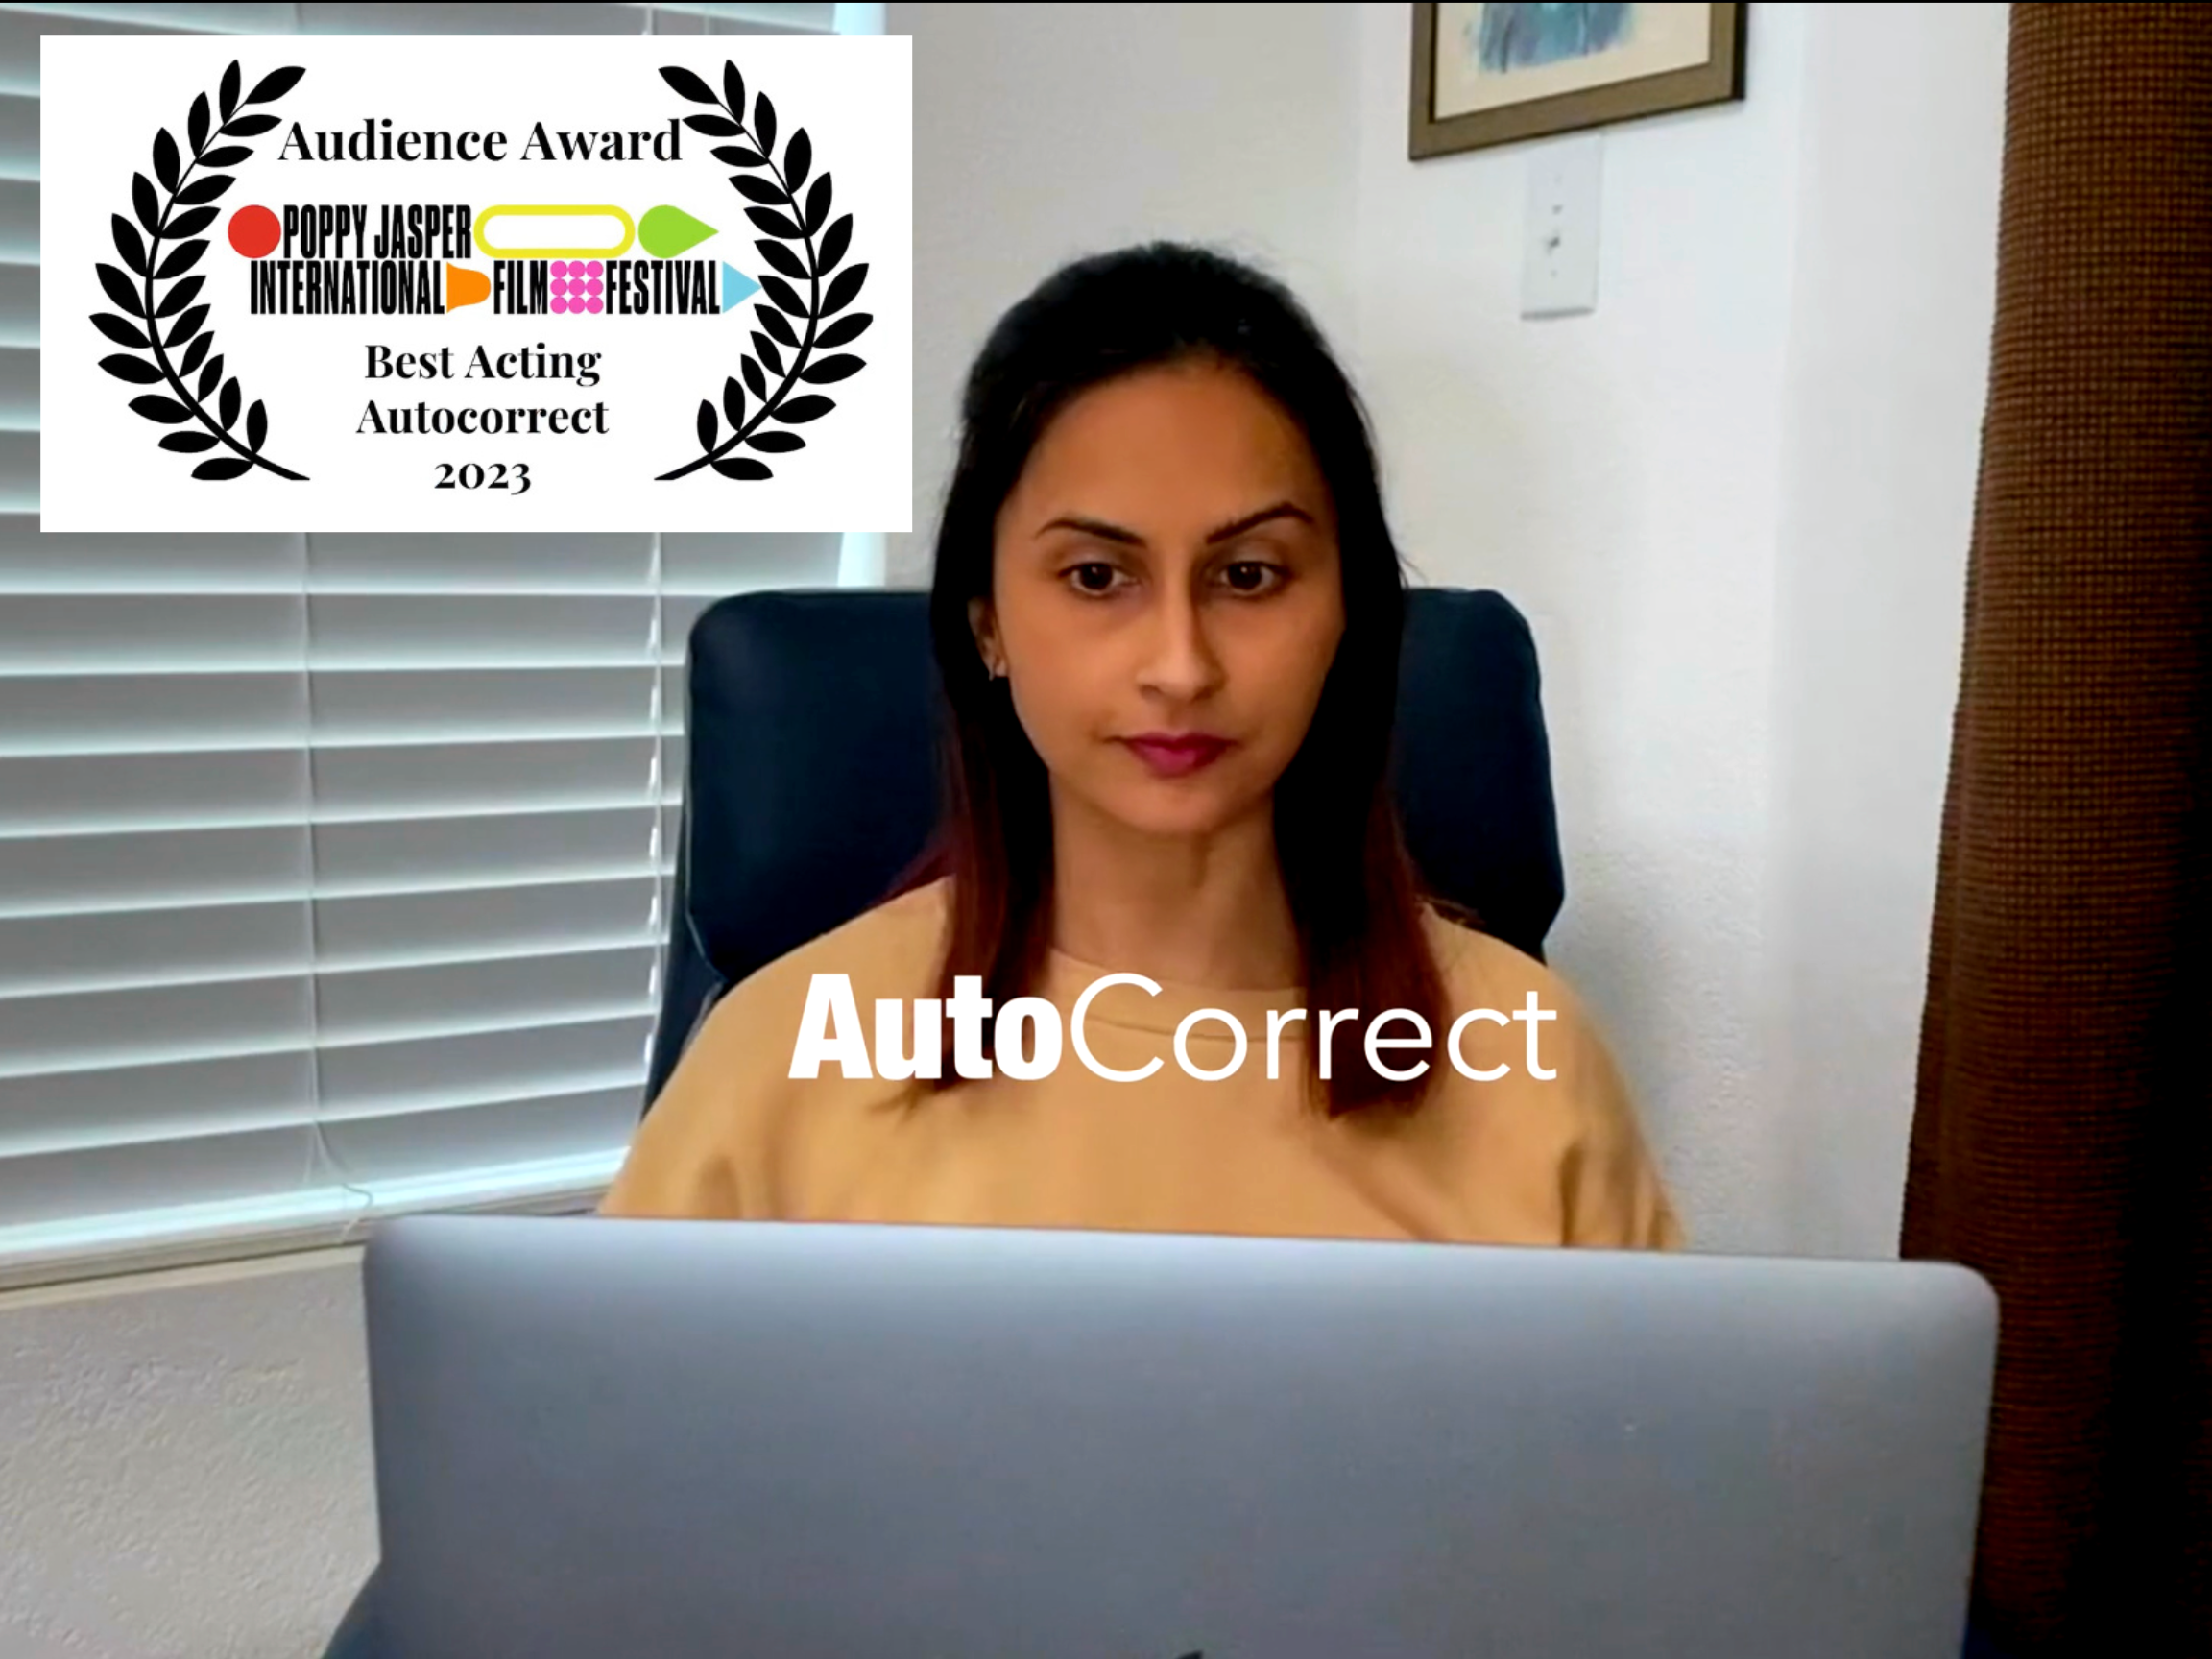 Poster of AutoCorrect film. A young South Asian woman, seated, looks apprehensively at a laptop computer screen. The title AutoCorrect is superimposed over the back of the laptop. Four film festival laurels are featured across the bottom of the poster and one is on the top left.